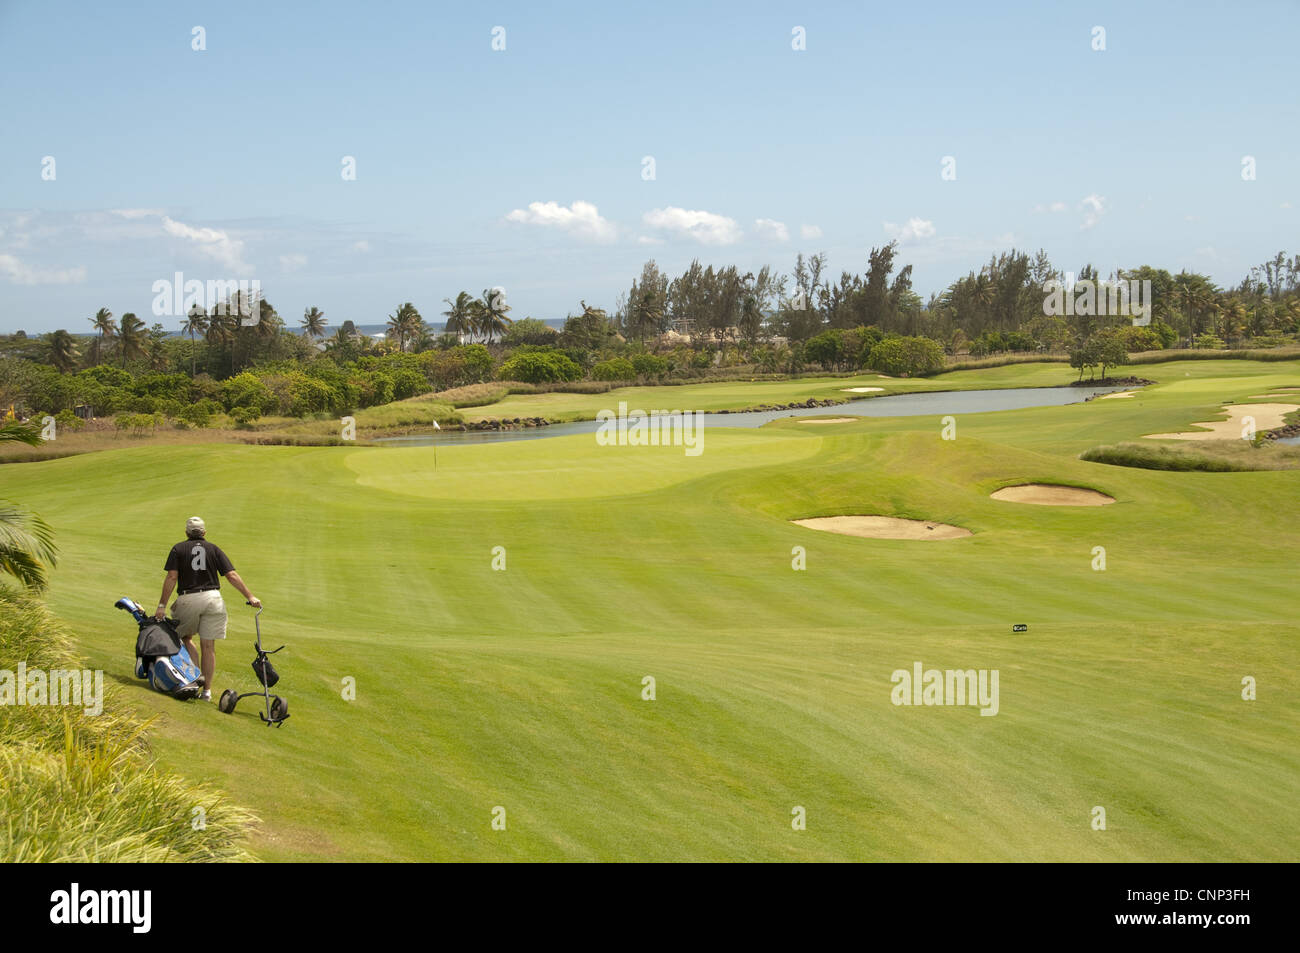 Golfer pulling golf cart across golf course, Le Telfair Hotel and Golf Course, Bel Ombre, Southwest Mauritius Stock Photo